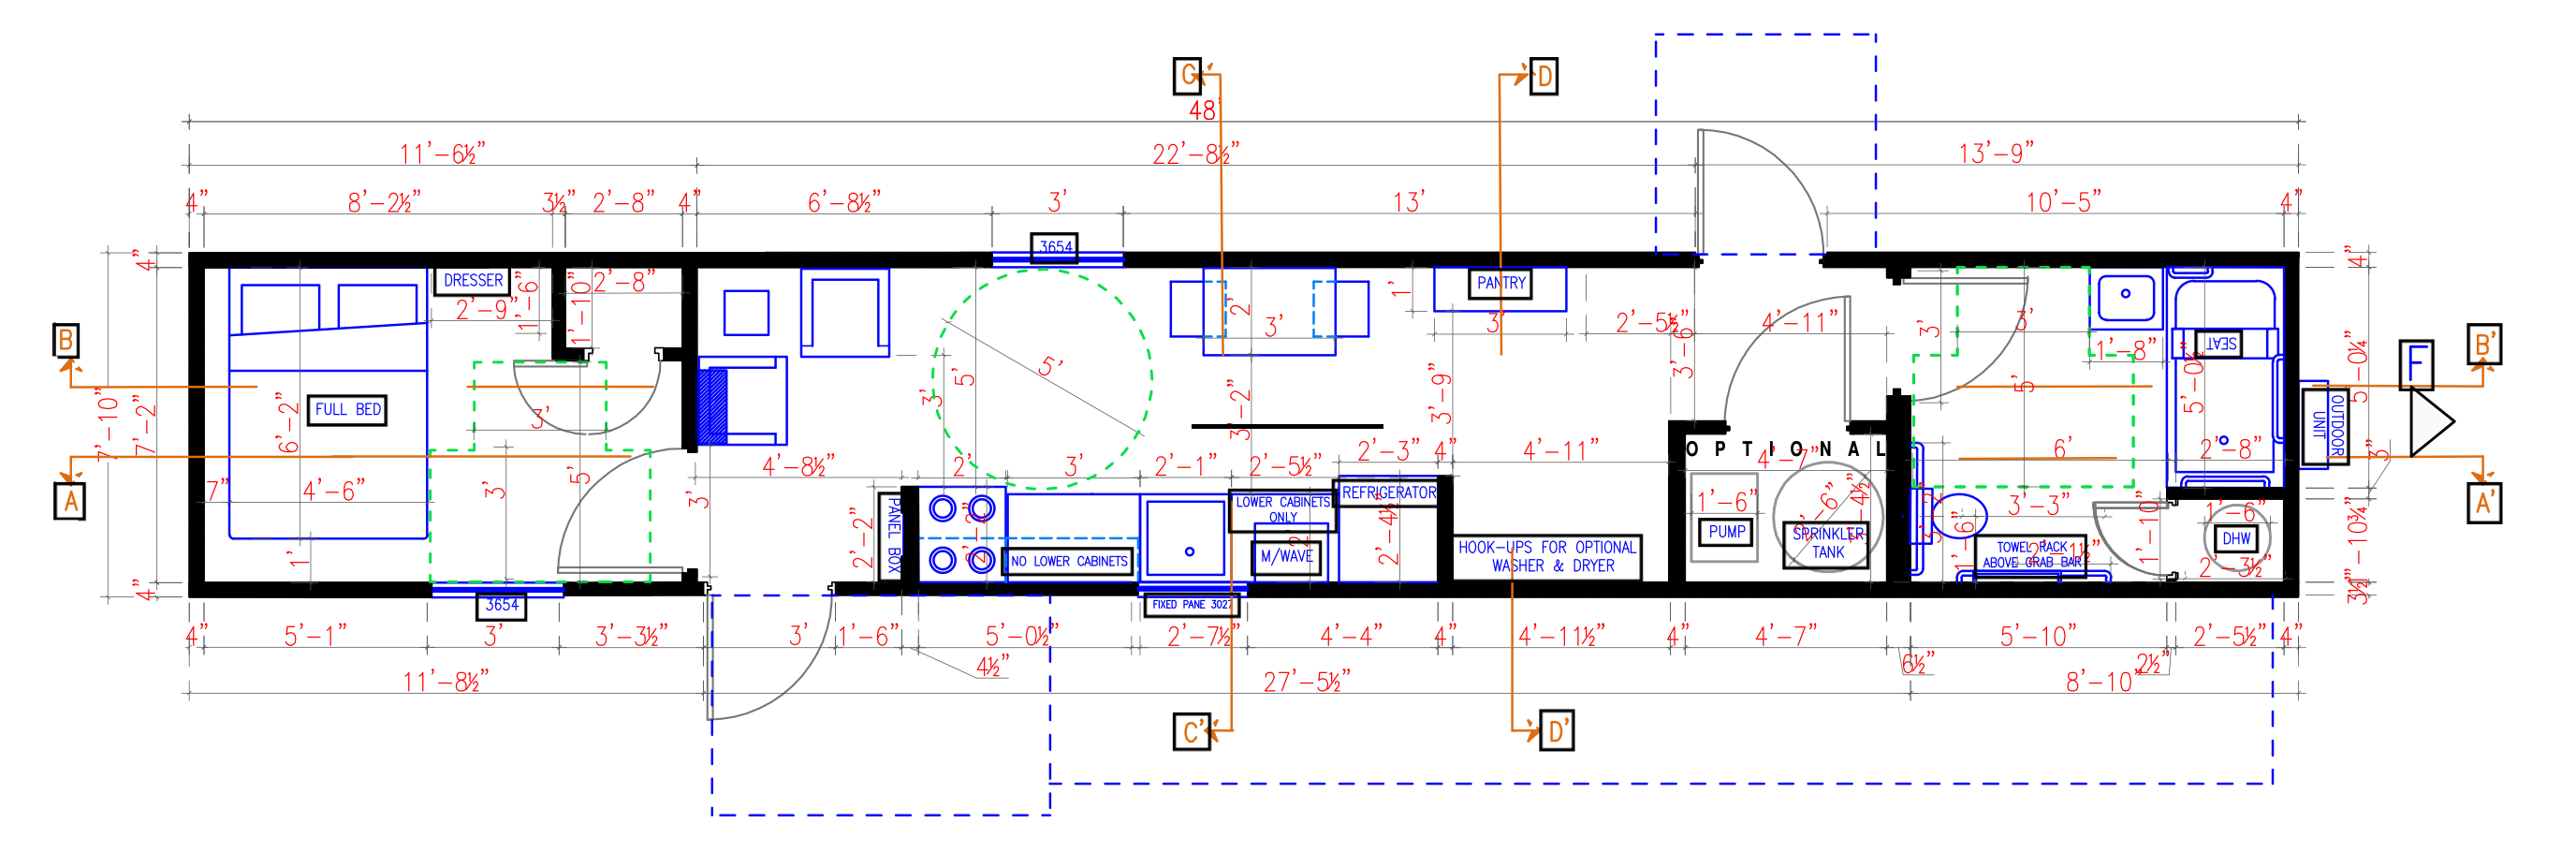 A plan of a typical mobile home unit showing measurements, room designations, and appliances